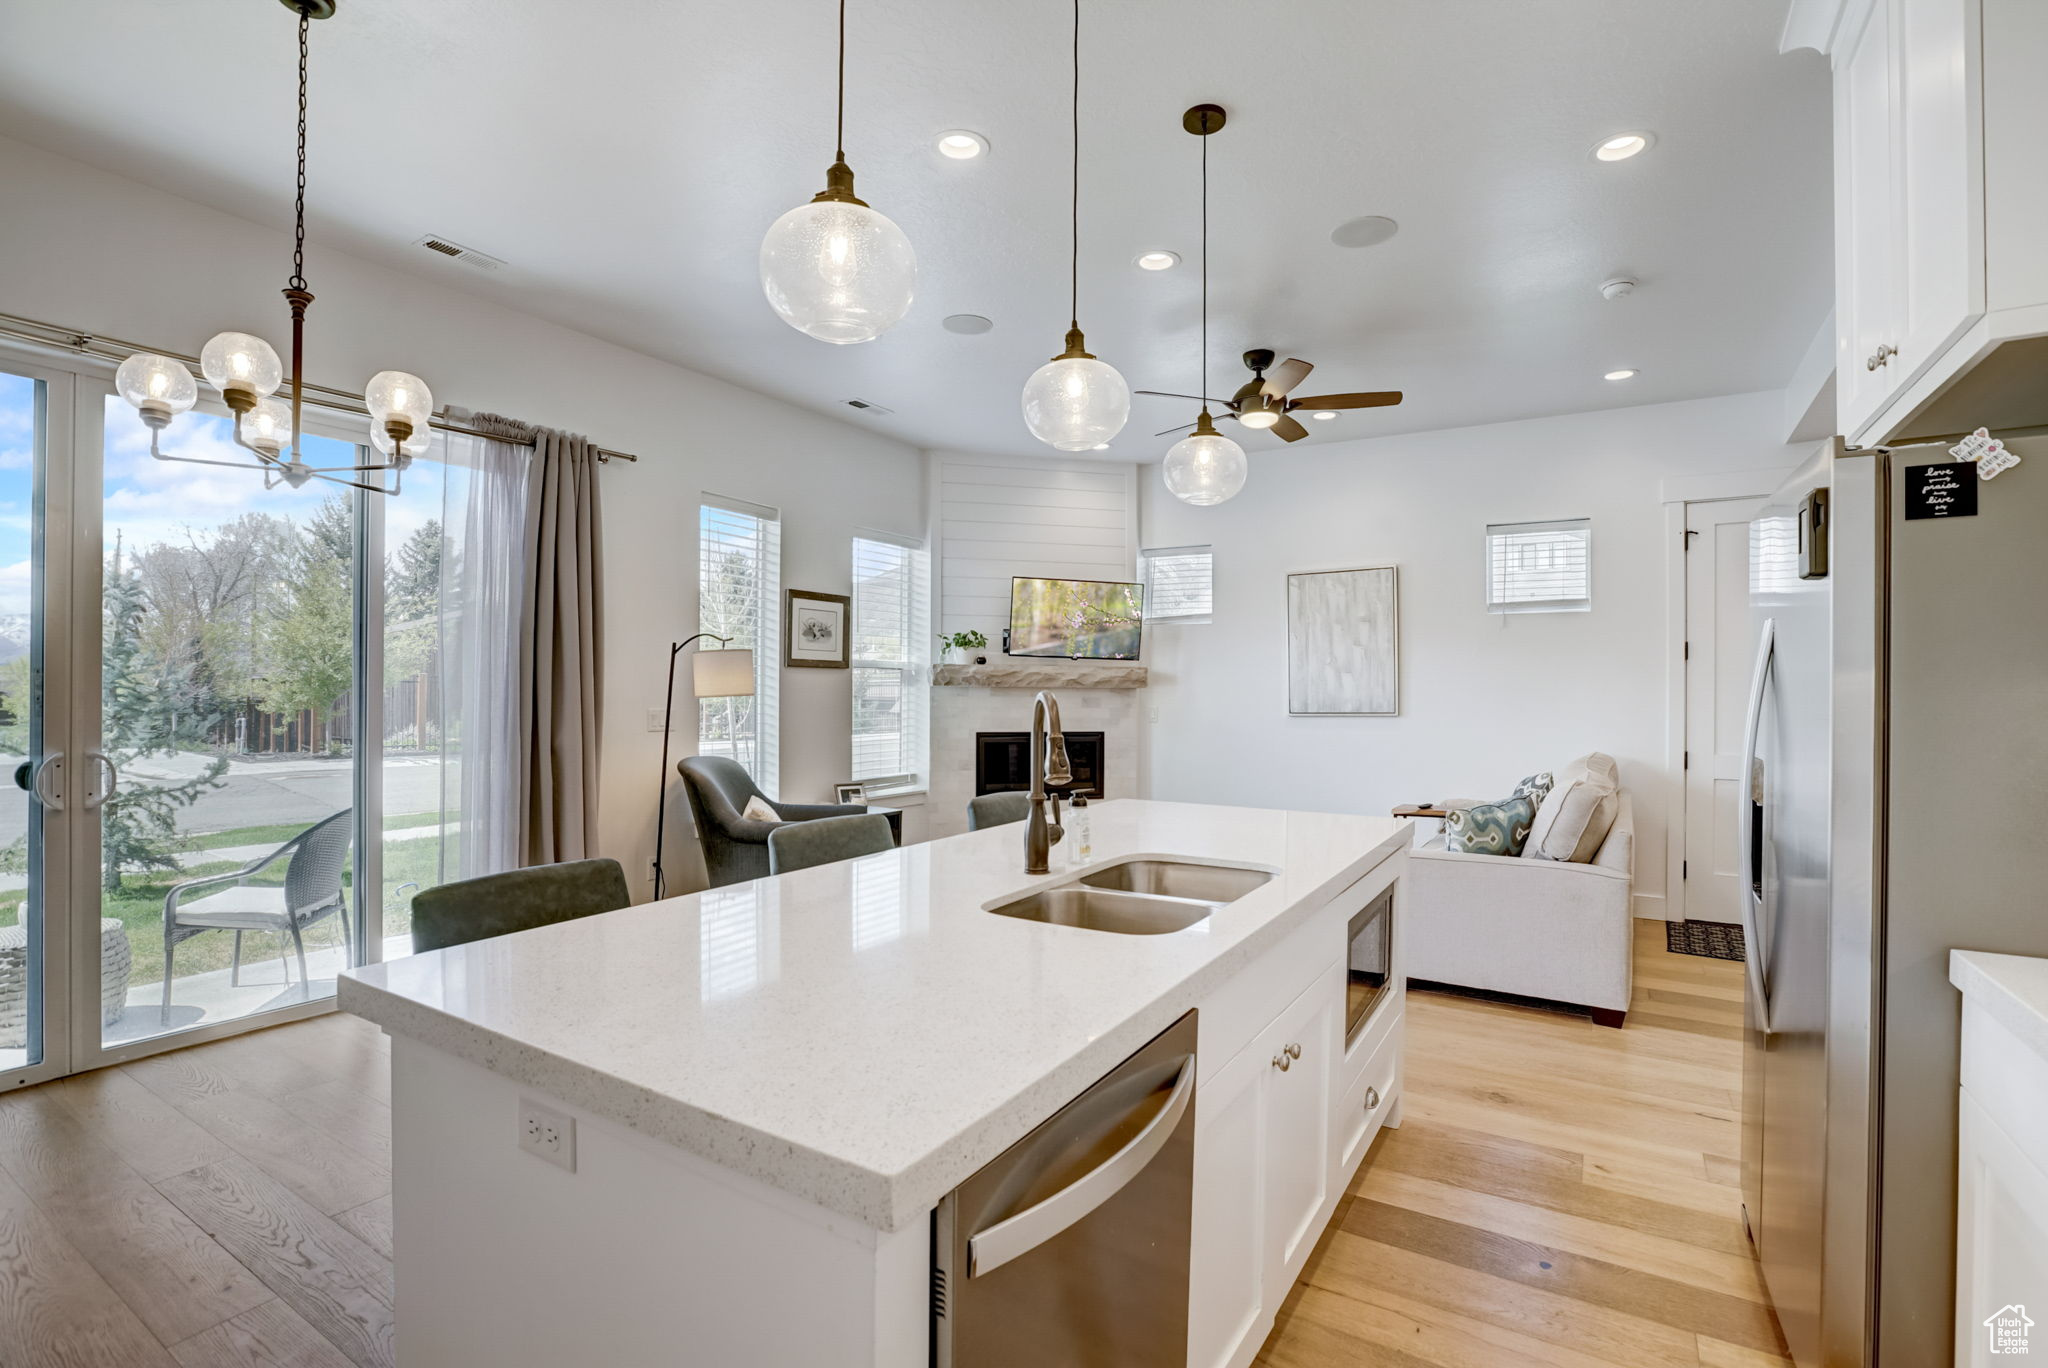 Kitchen featuring white cabinets, light hardwood, sink, and a center island with sink